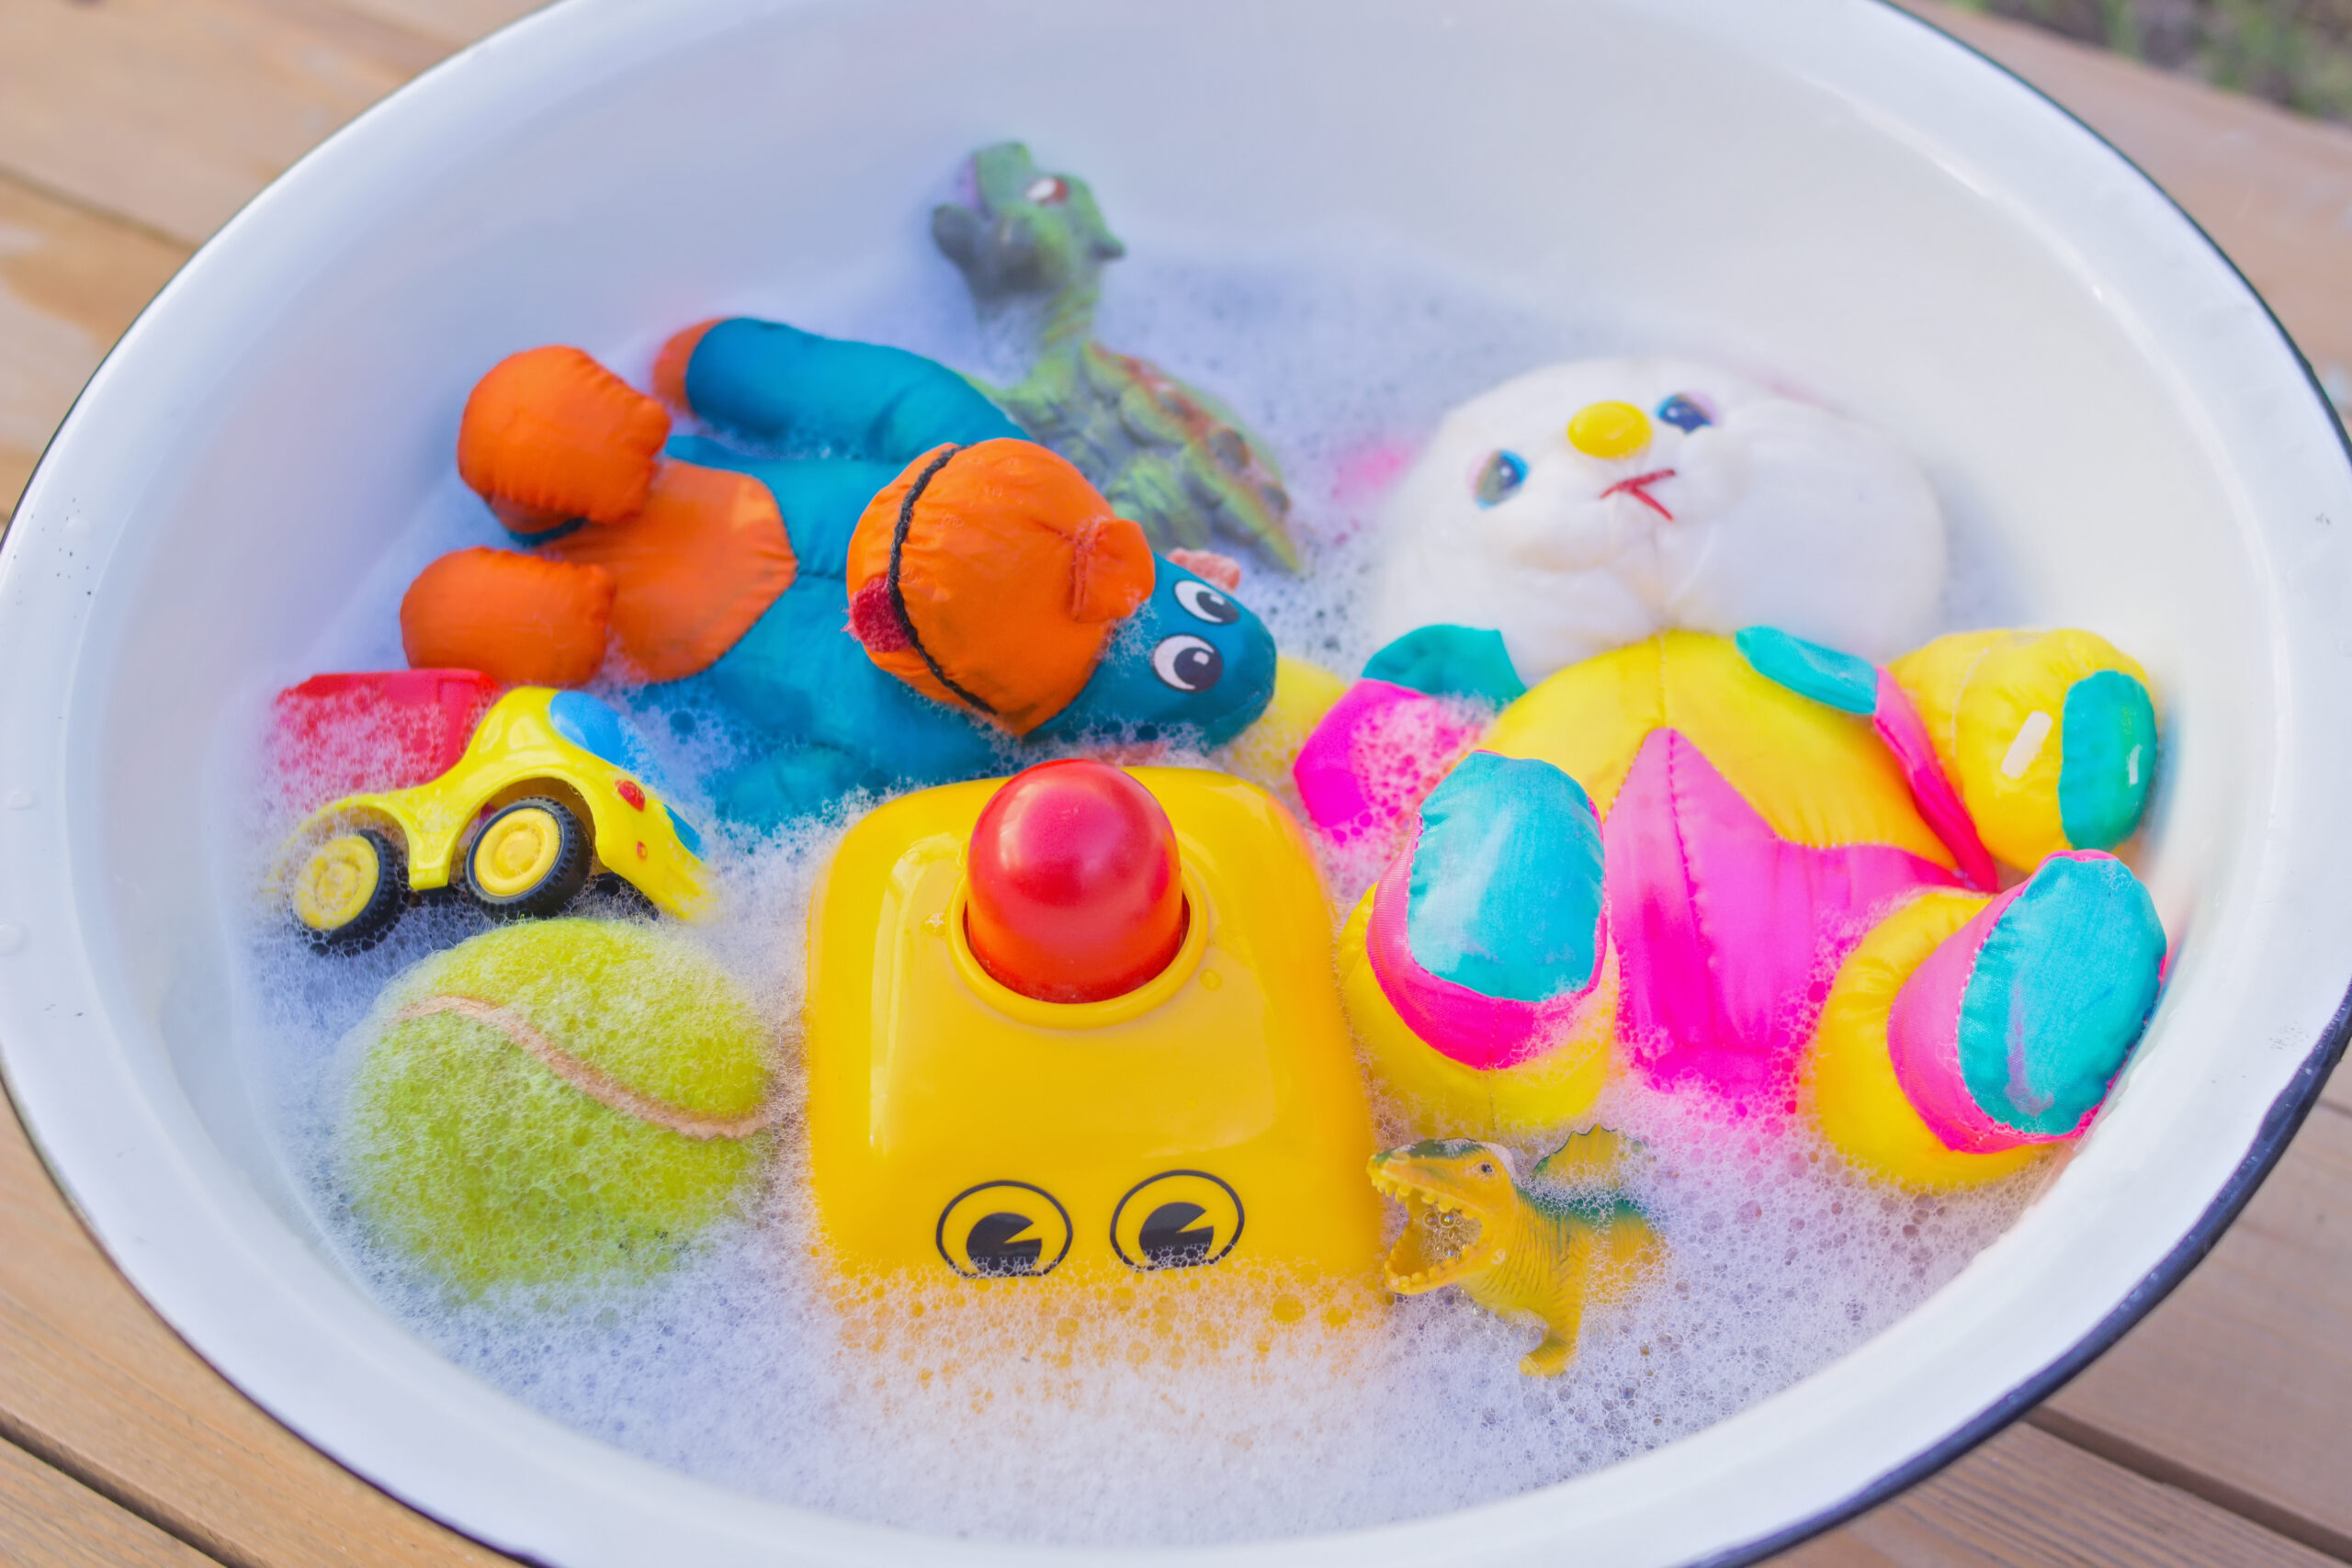 How To Clean Toys The Non Toxic Way